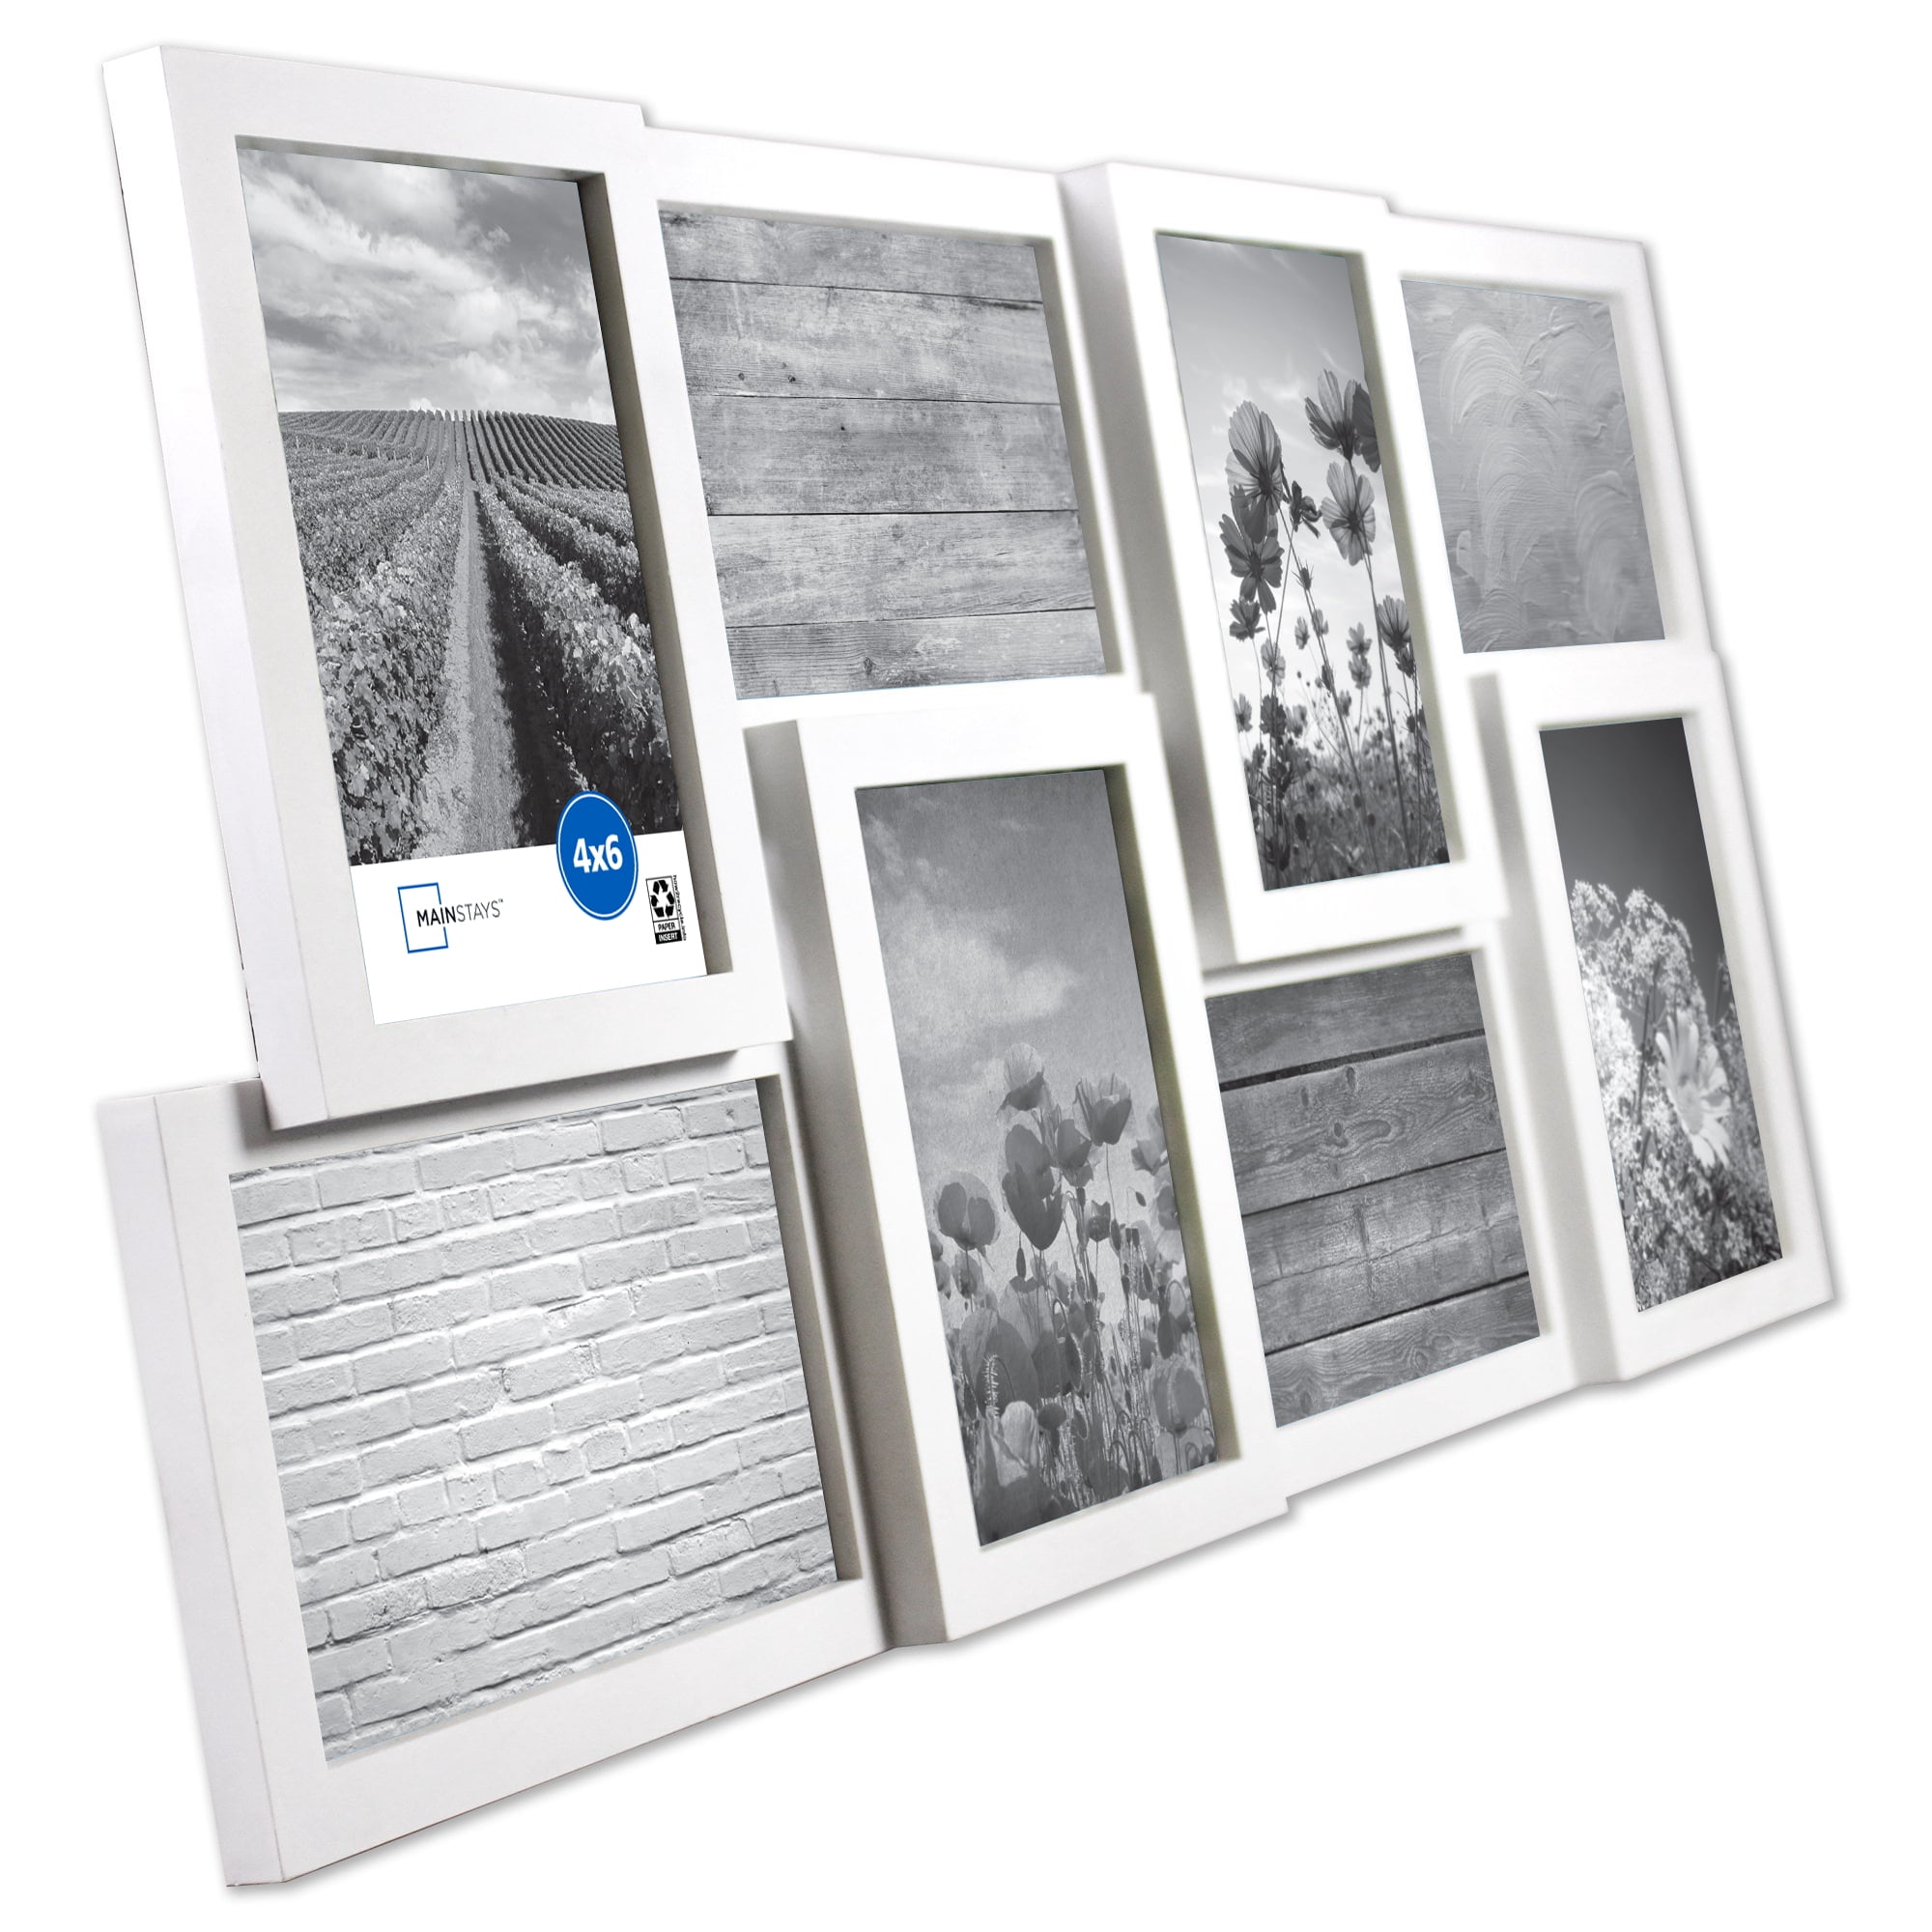 Mainstays 4x6 3-Opening Linear Gallery Collage Picture Frame, White